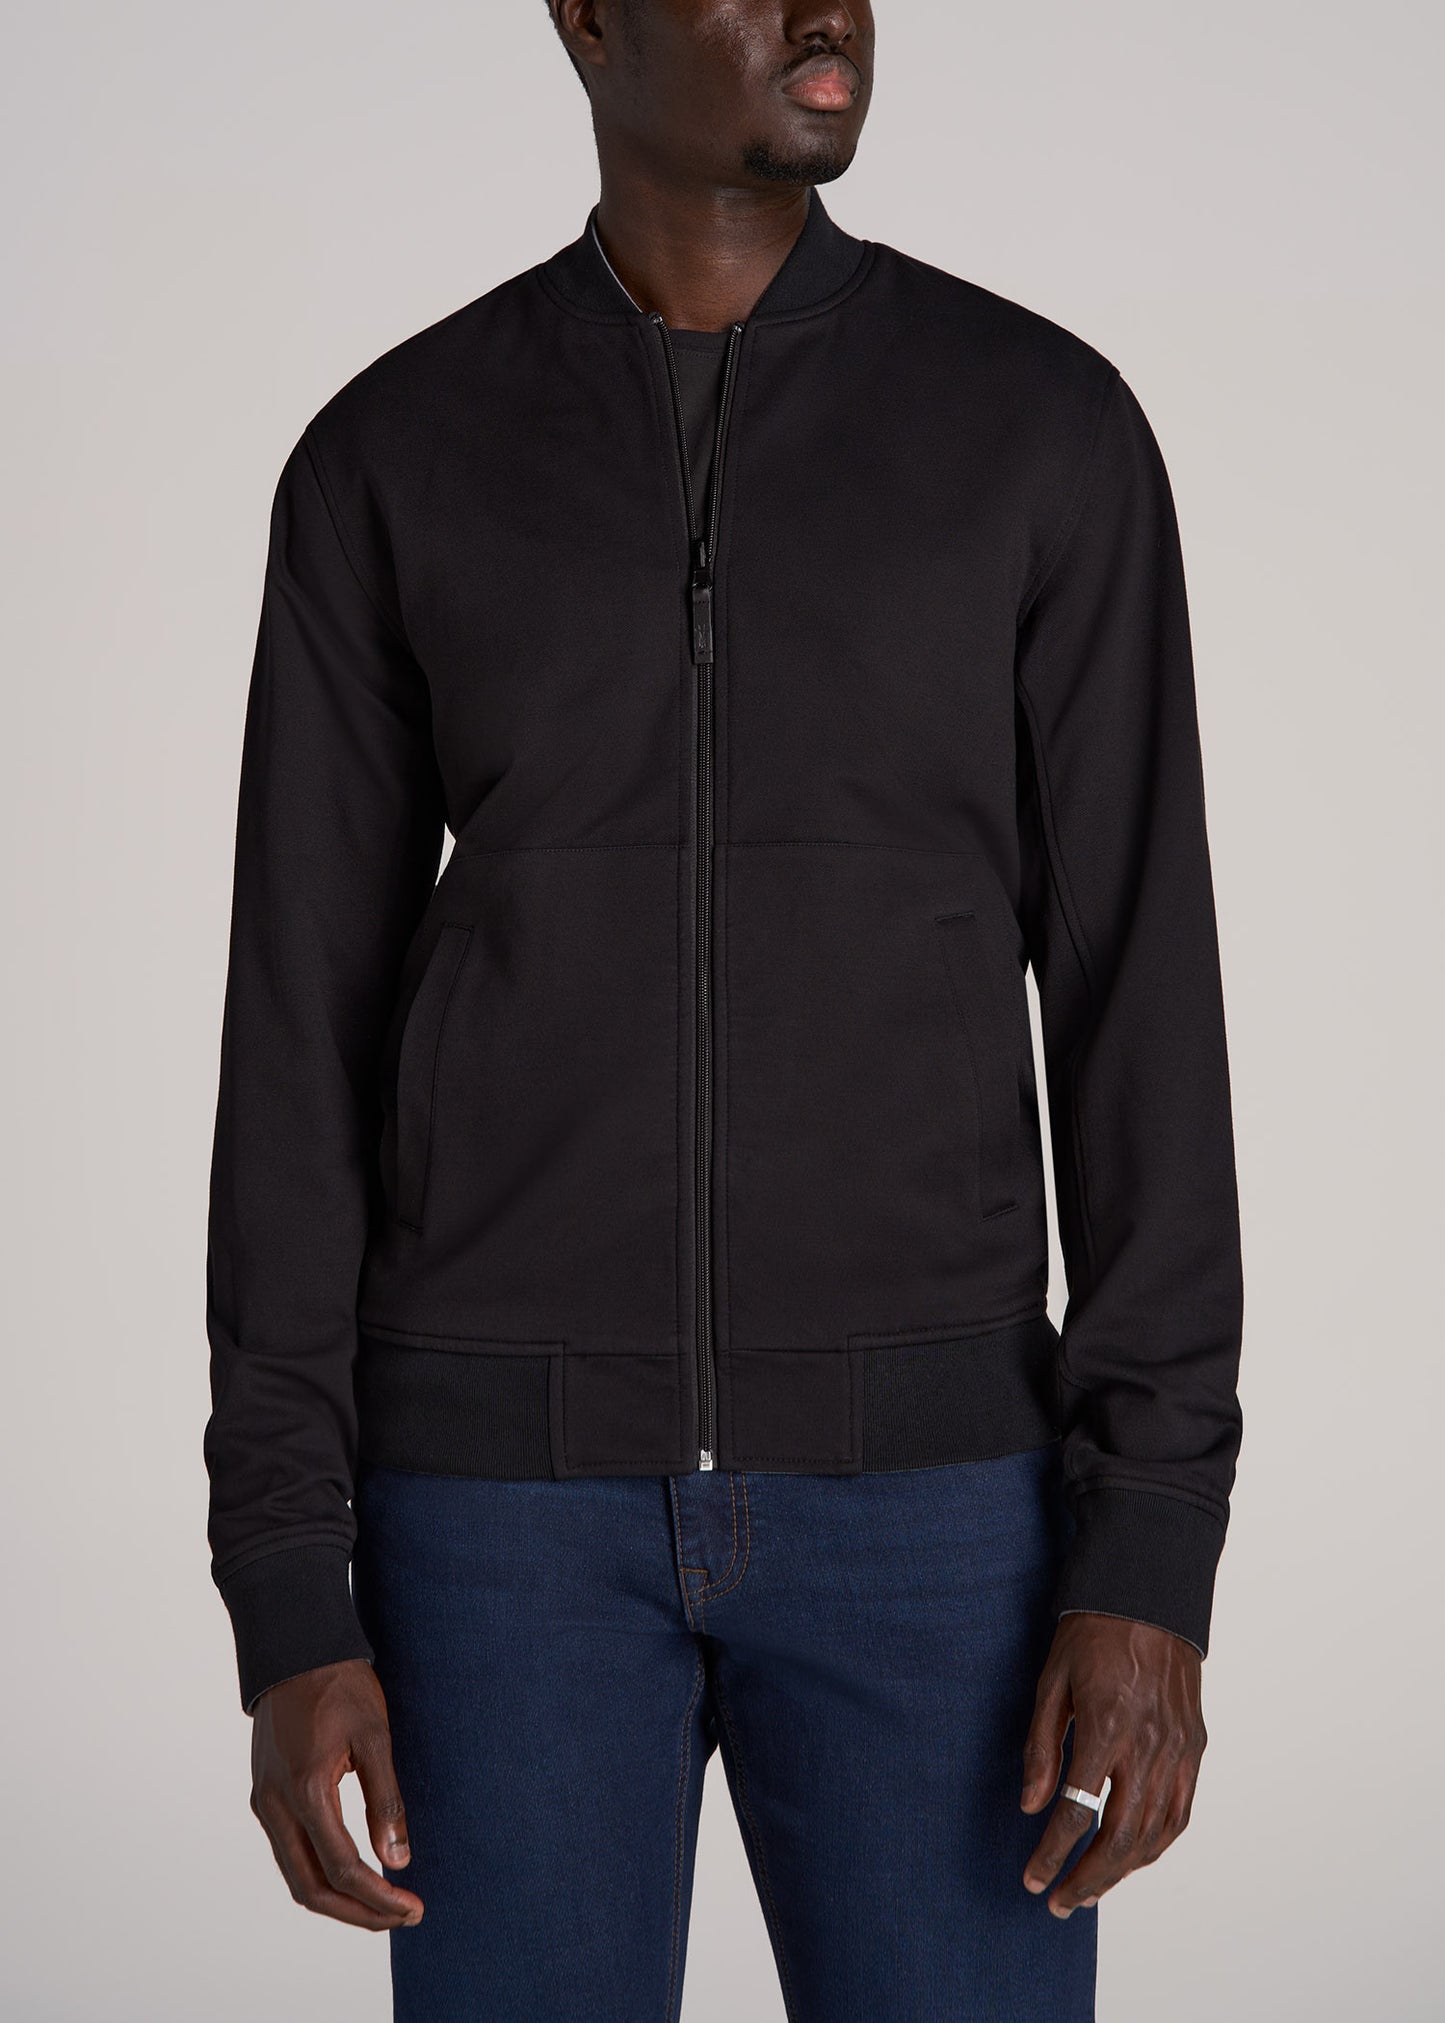 Reversible Men's Tall Bomber Jacket in Fossil Grey and Black